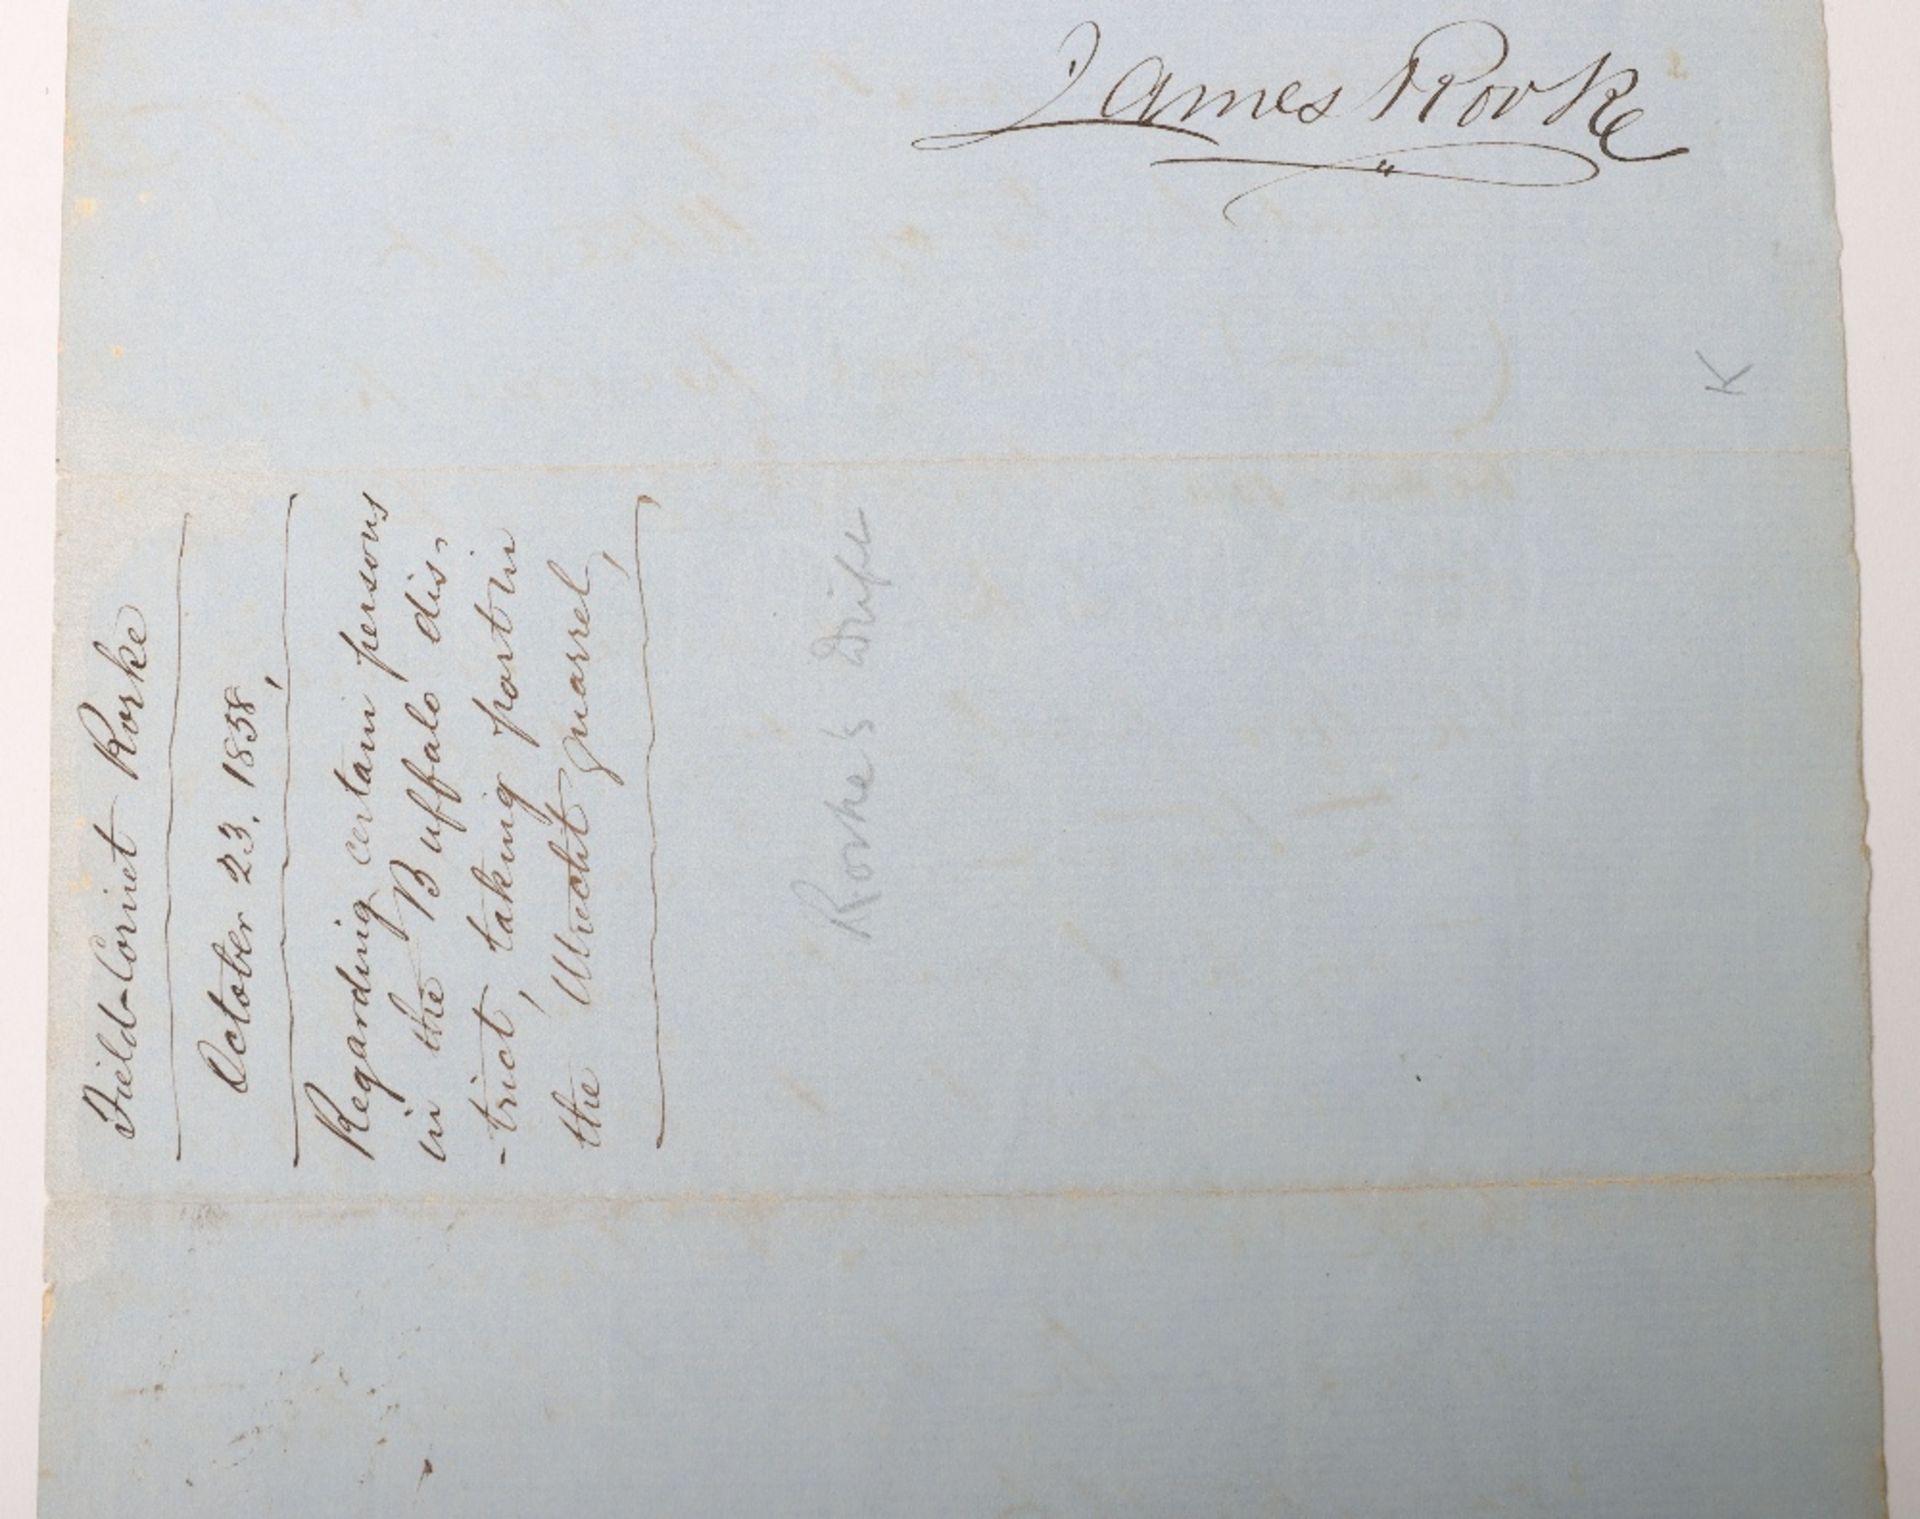 Interesting Signed Document of James Alfred Rorke, Known as “Rorke of Rorkes Drift” - Image 7 of 7